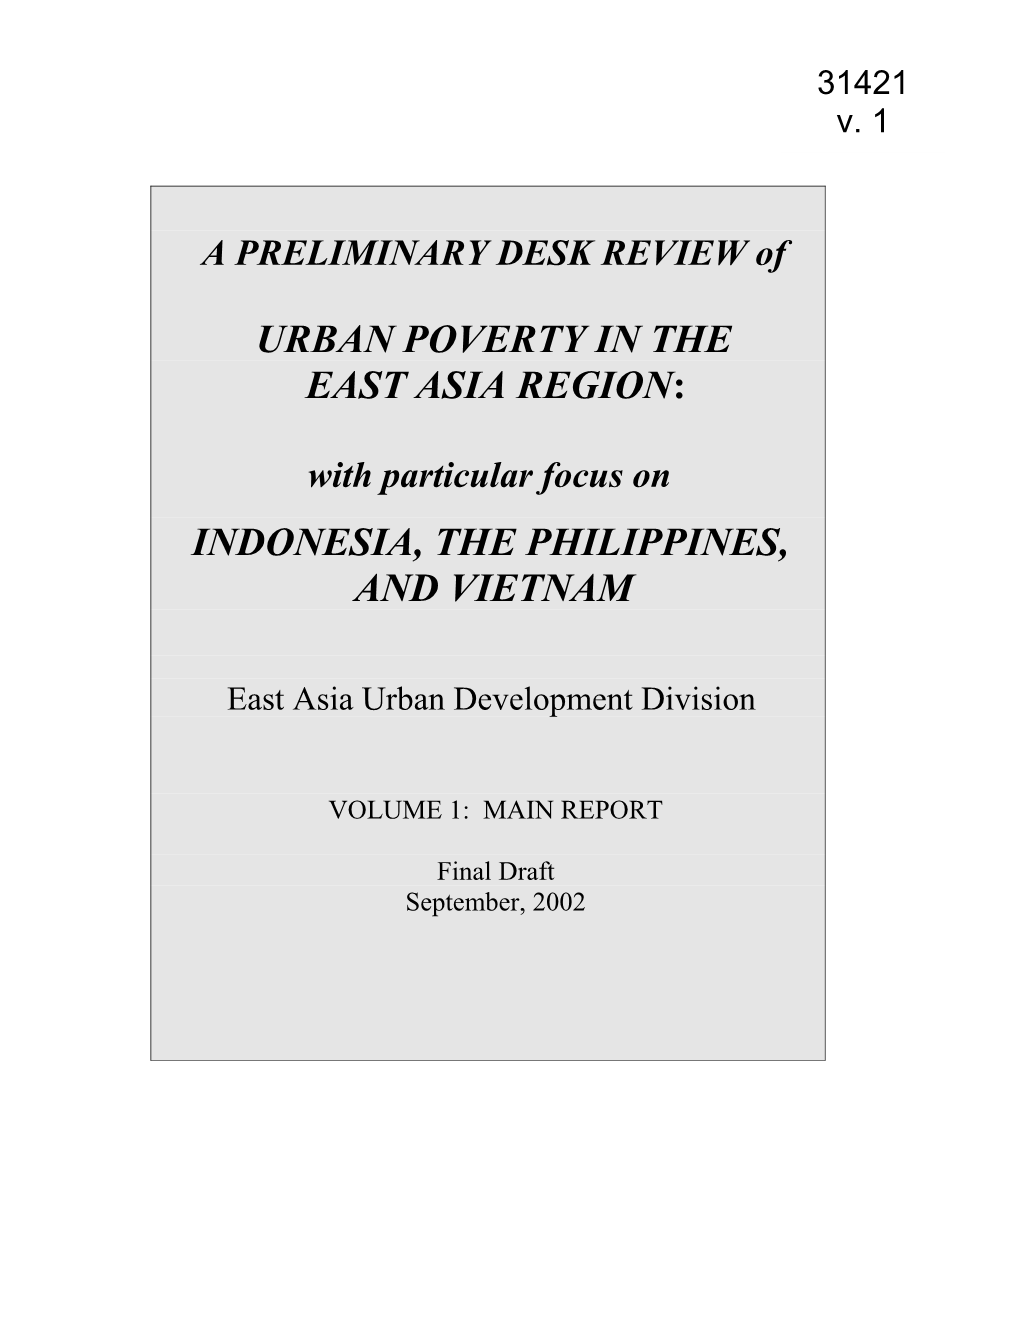 Urban Poverty in the East Asia Region: a Preliminary Desk Review